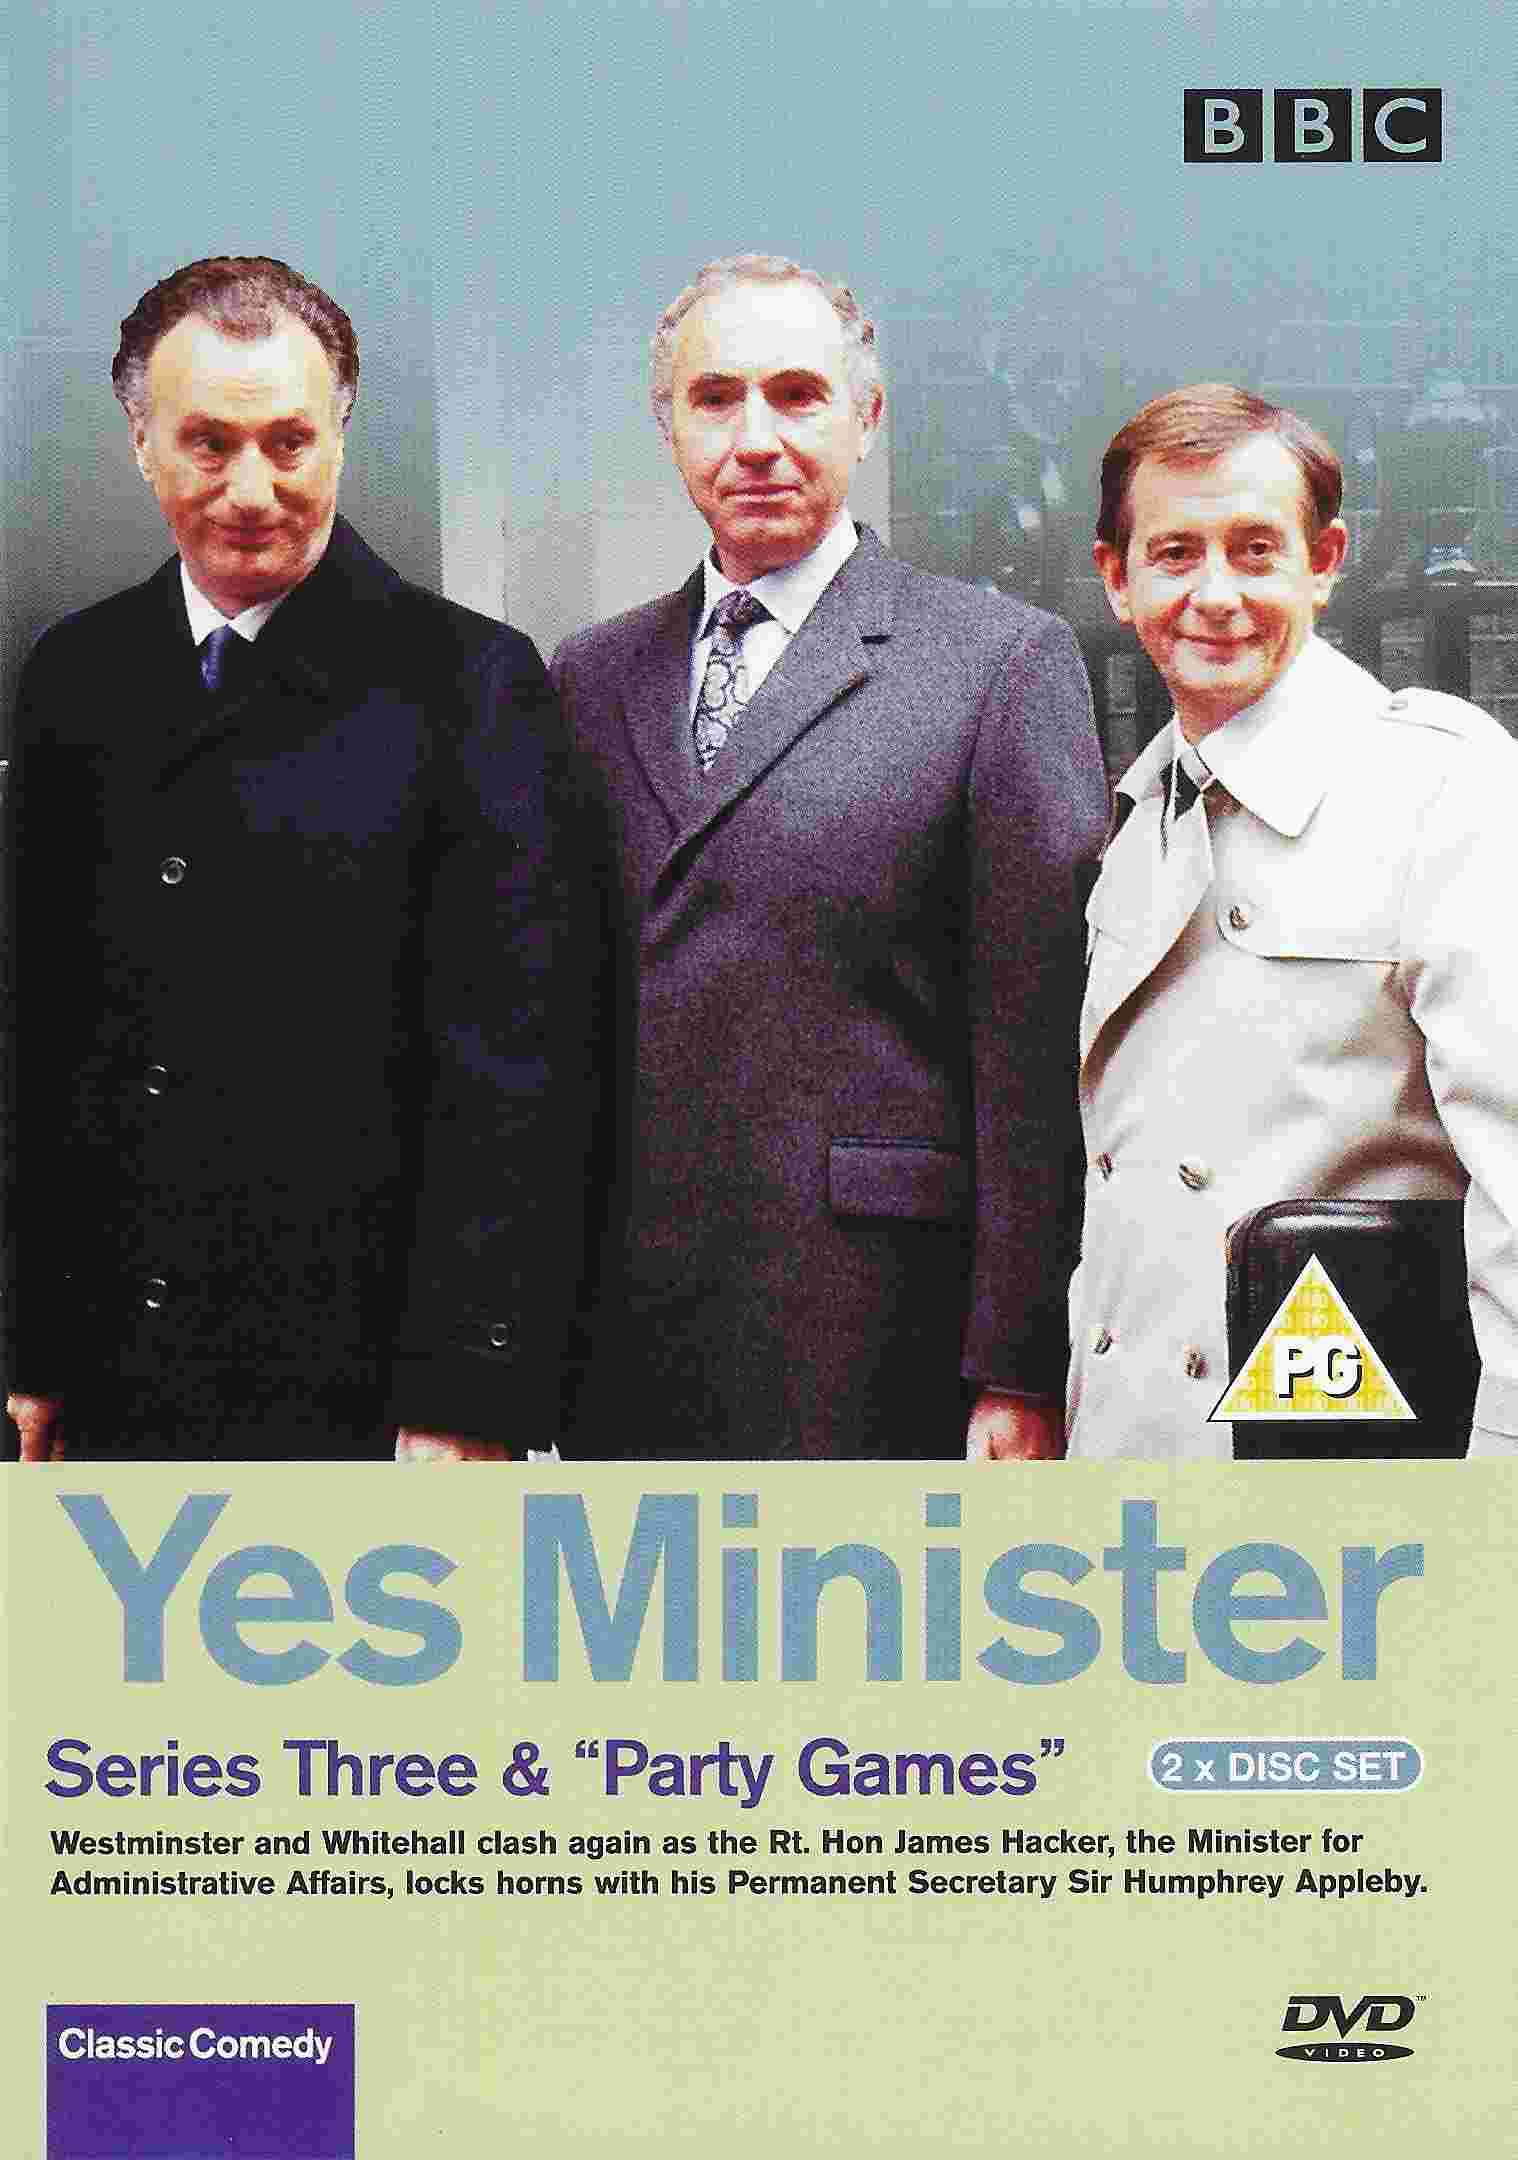 Picture of BBCDVD 1188 Yes Minister - Series Three by artist Antony Jay / Jonathan Lynn from the BBC dvds - Records and Tapes library